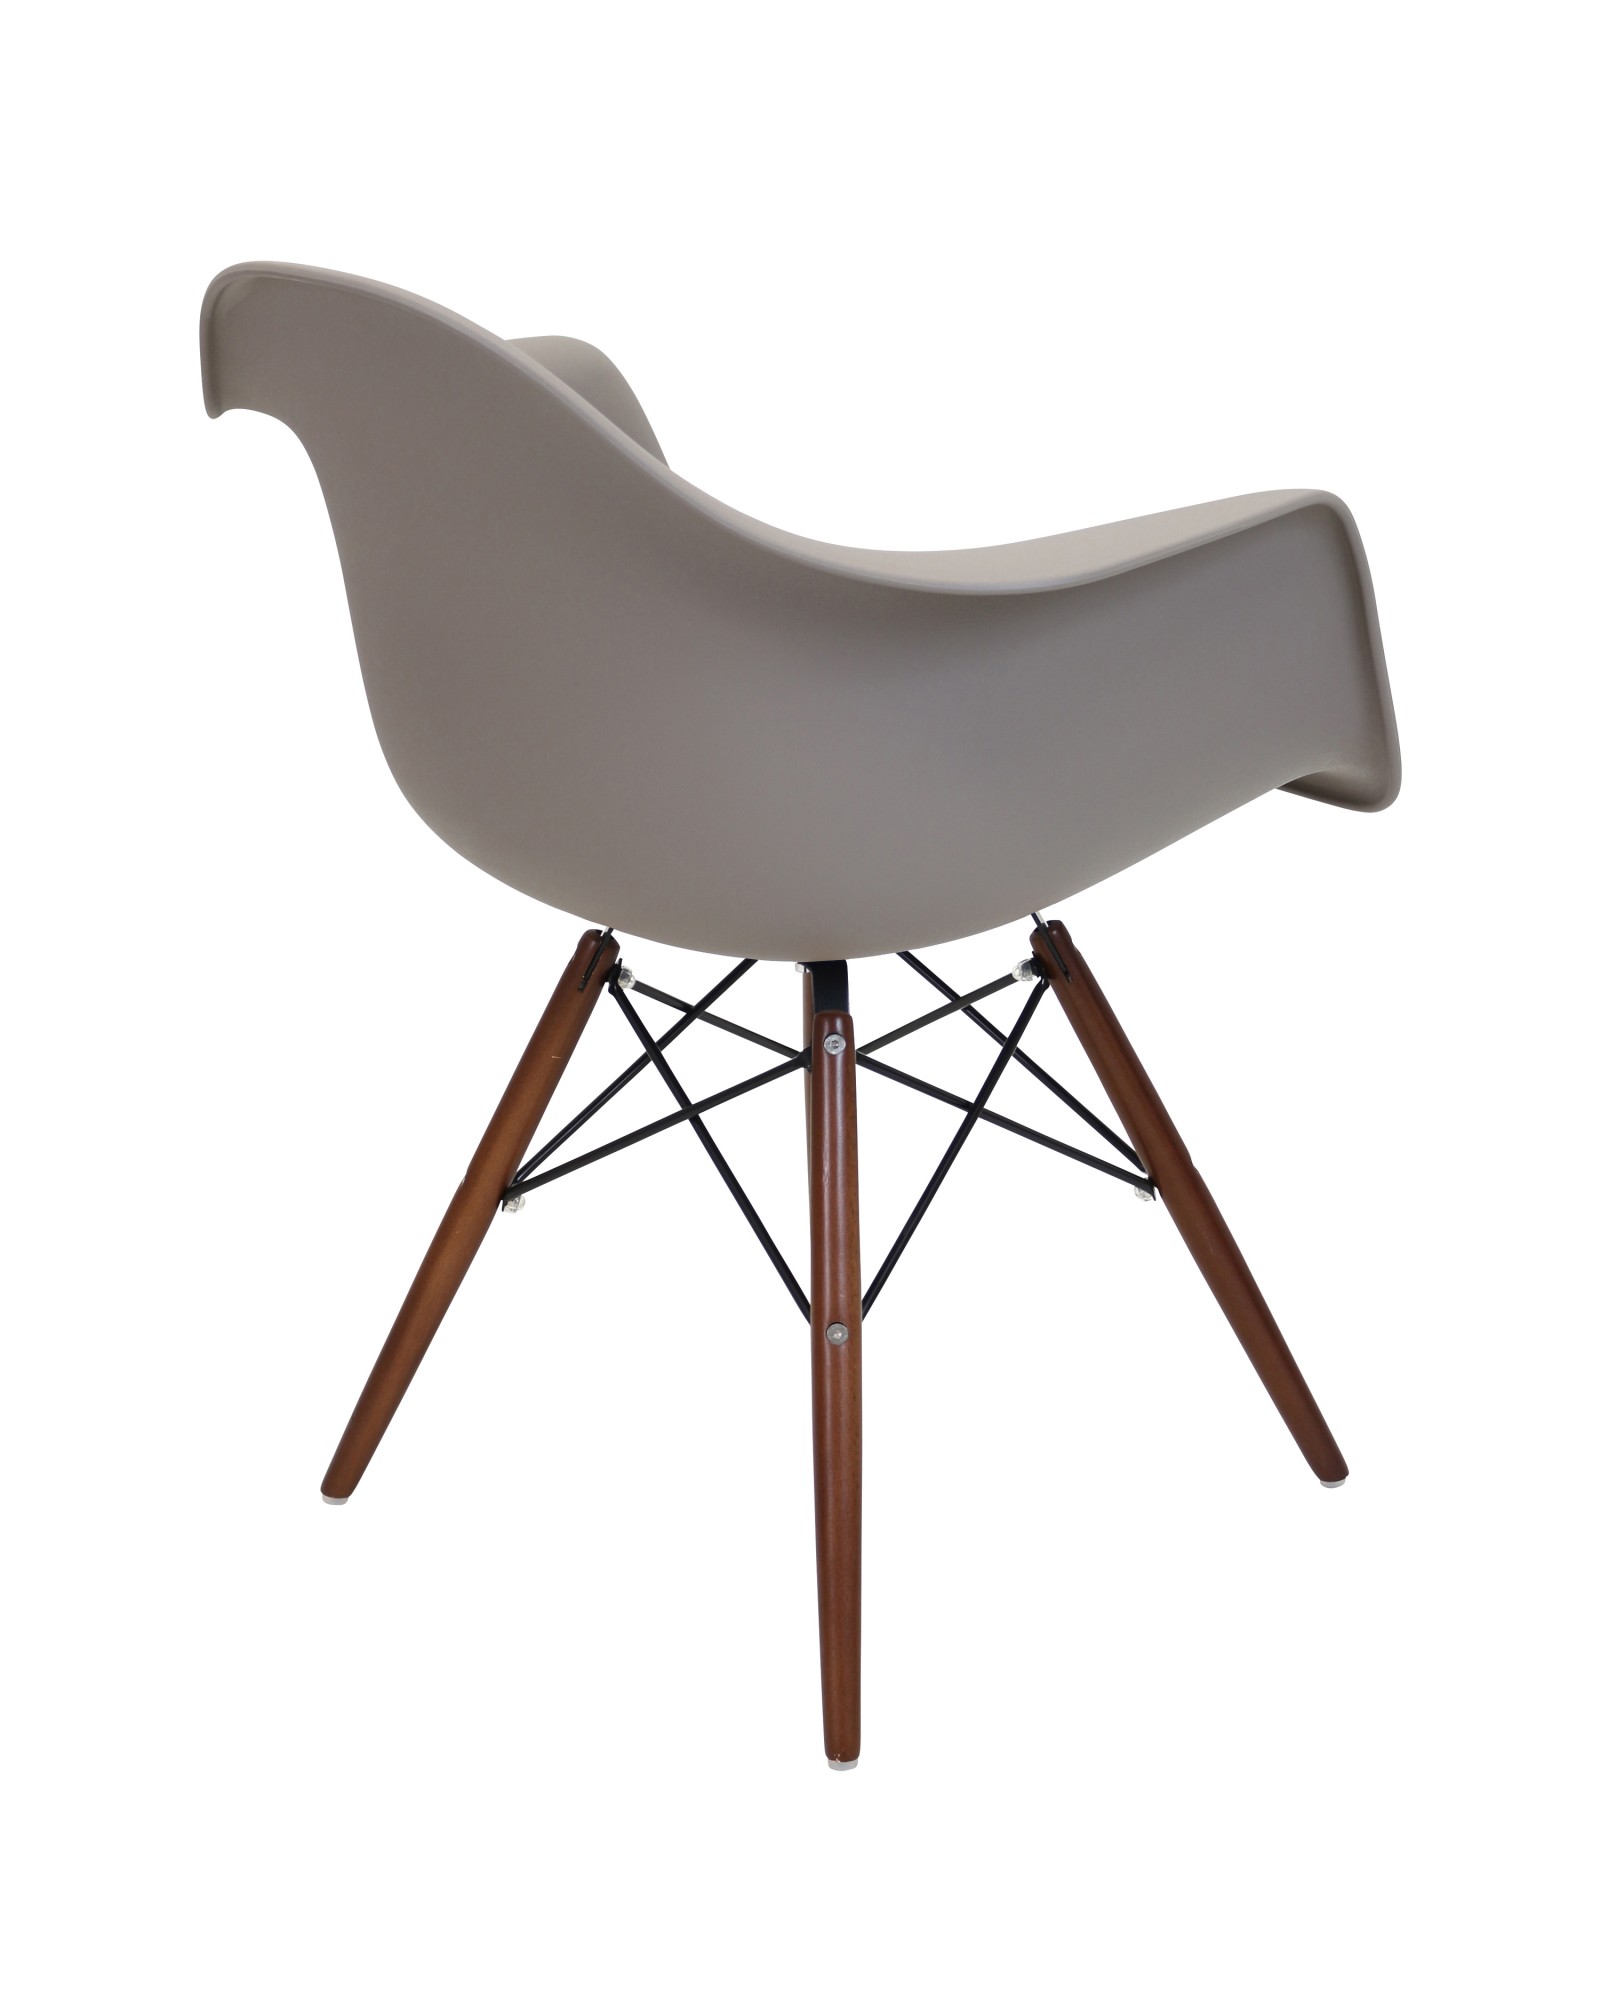 Neo Flair Mid-Century Modern Chair in Cappuccino and Espresso - Set of 2